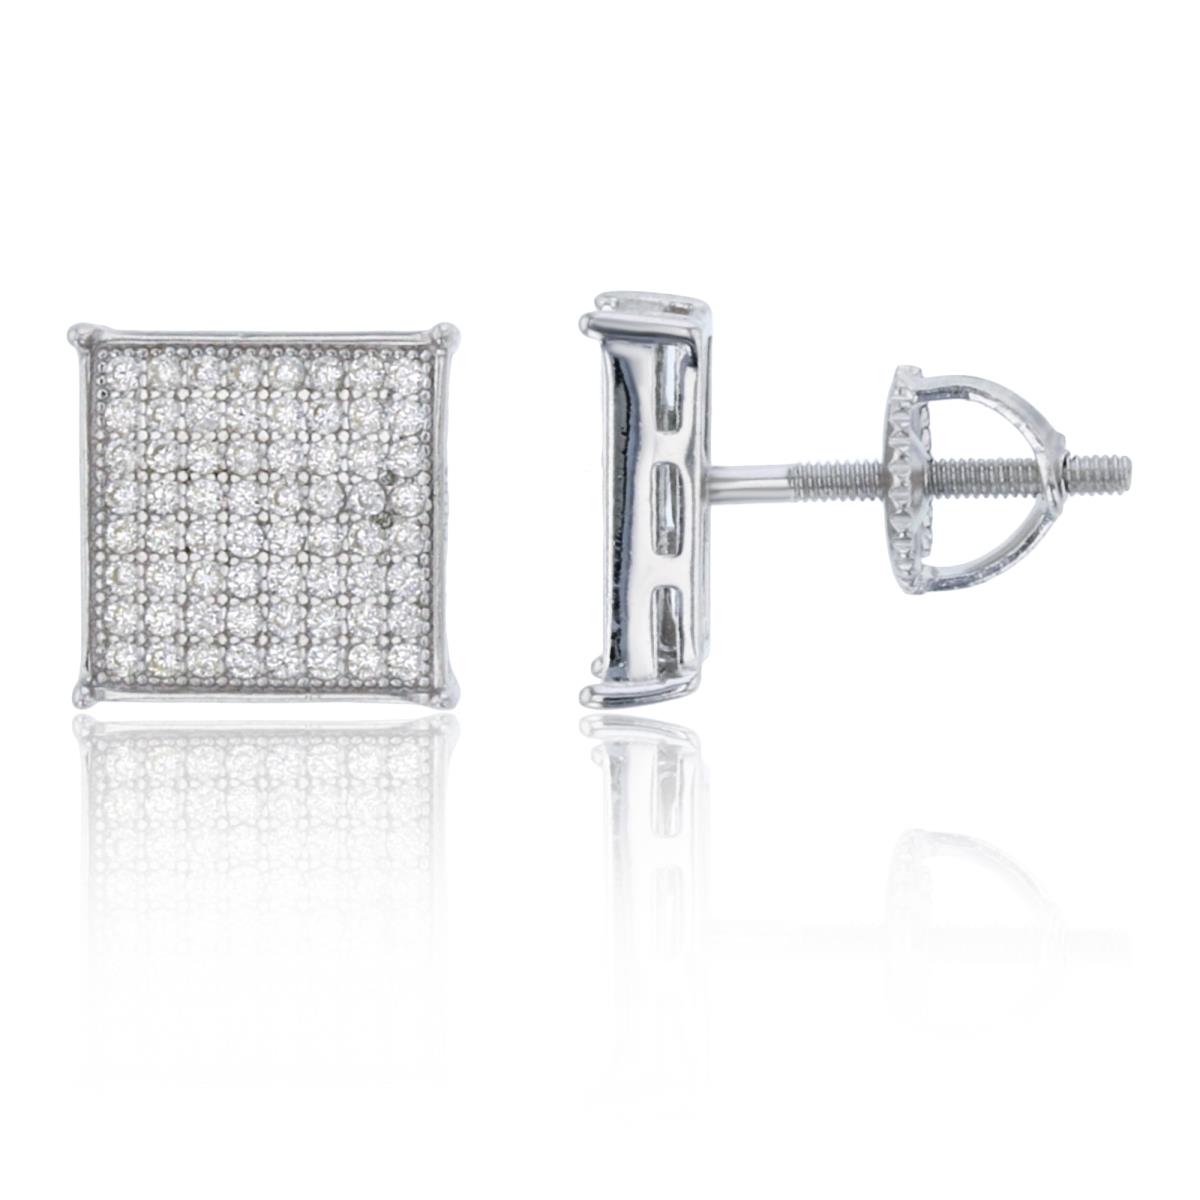 Sterling Silver 10x10mm Square Micropave Screwback Stud Earring